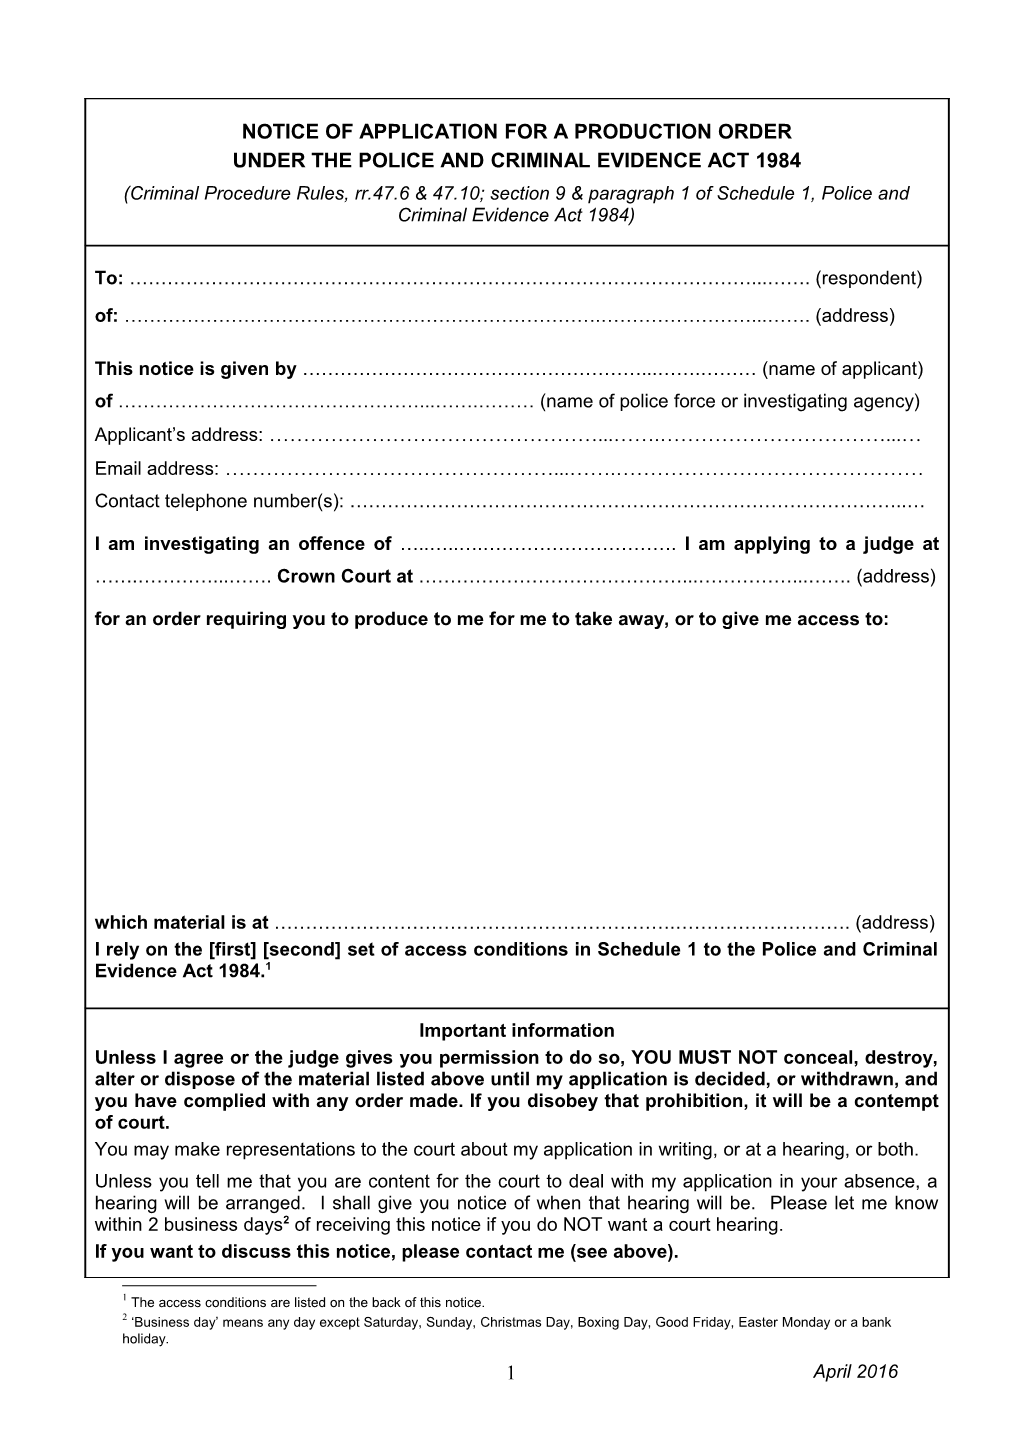 Notice of Application for a Production Order